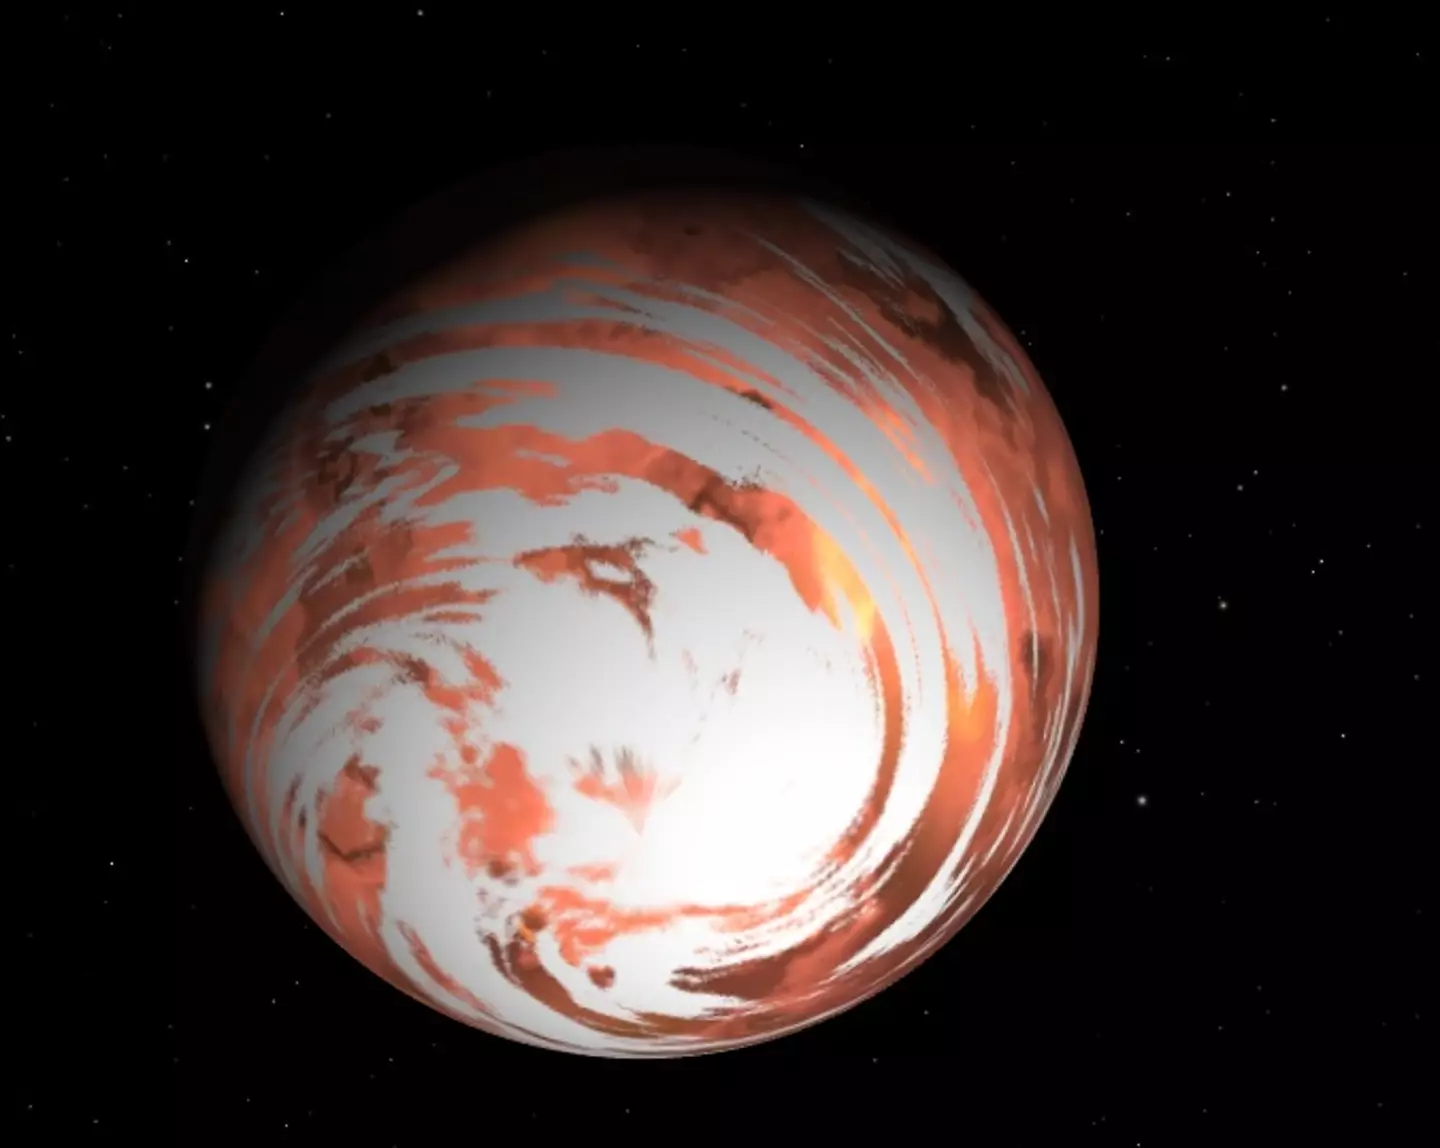 Metal, rock and the potential for a deep ocean. Welcome to planet TOI-1452b.